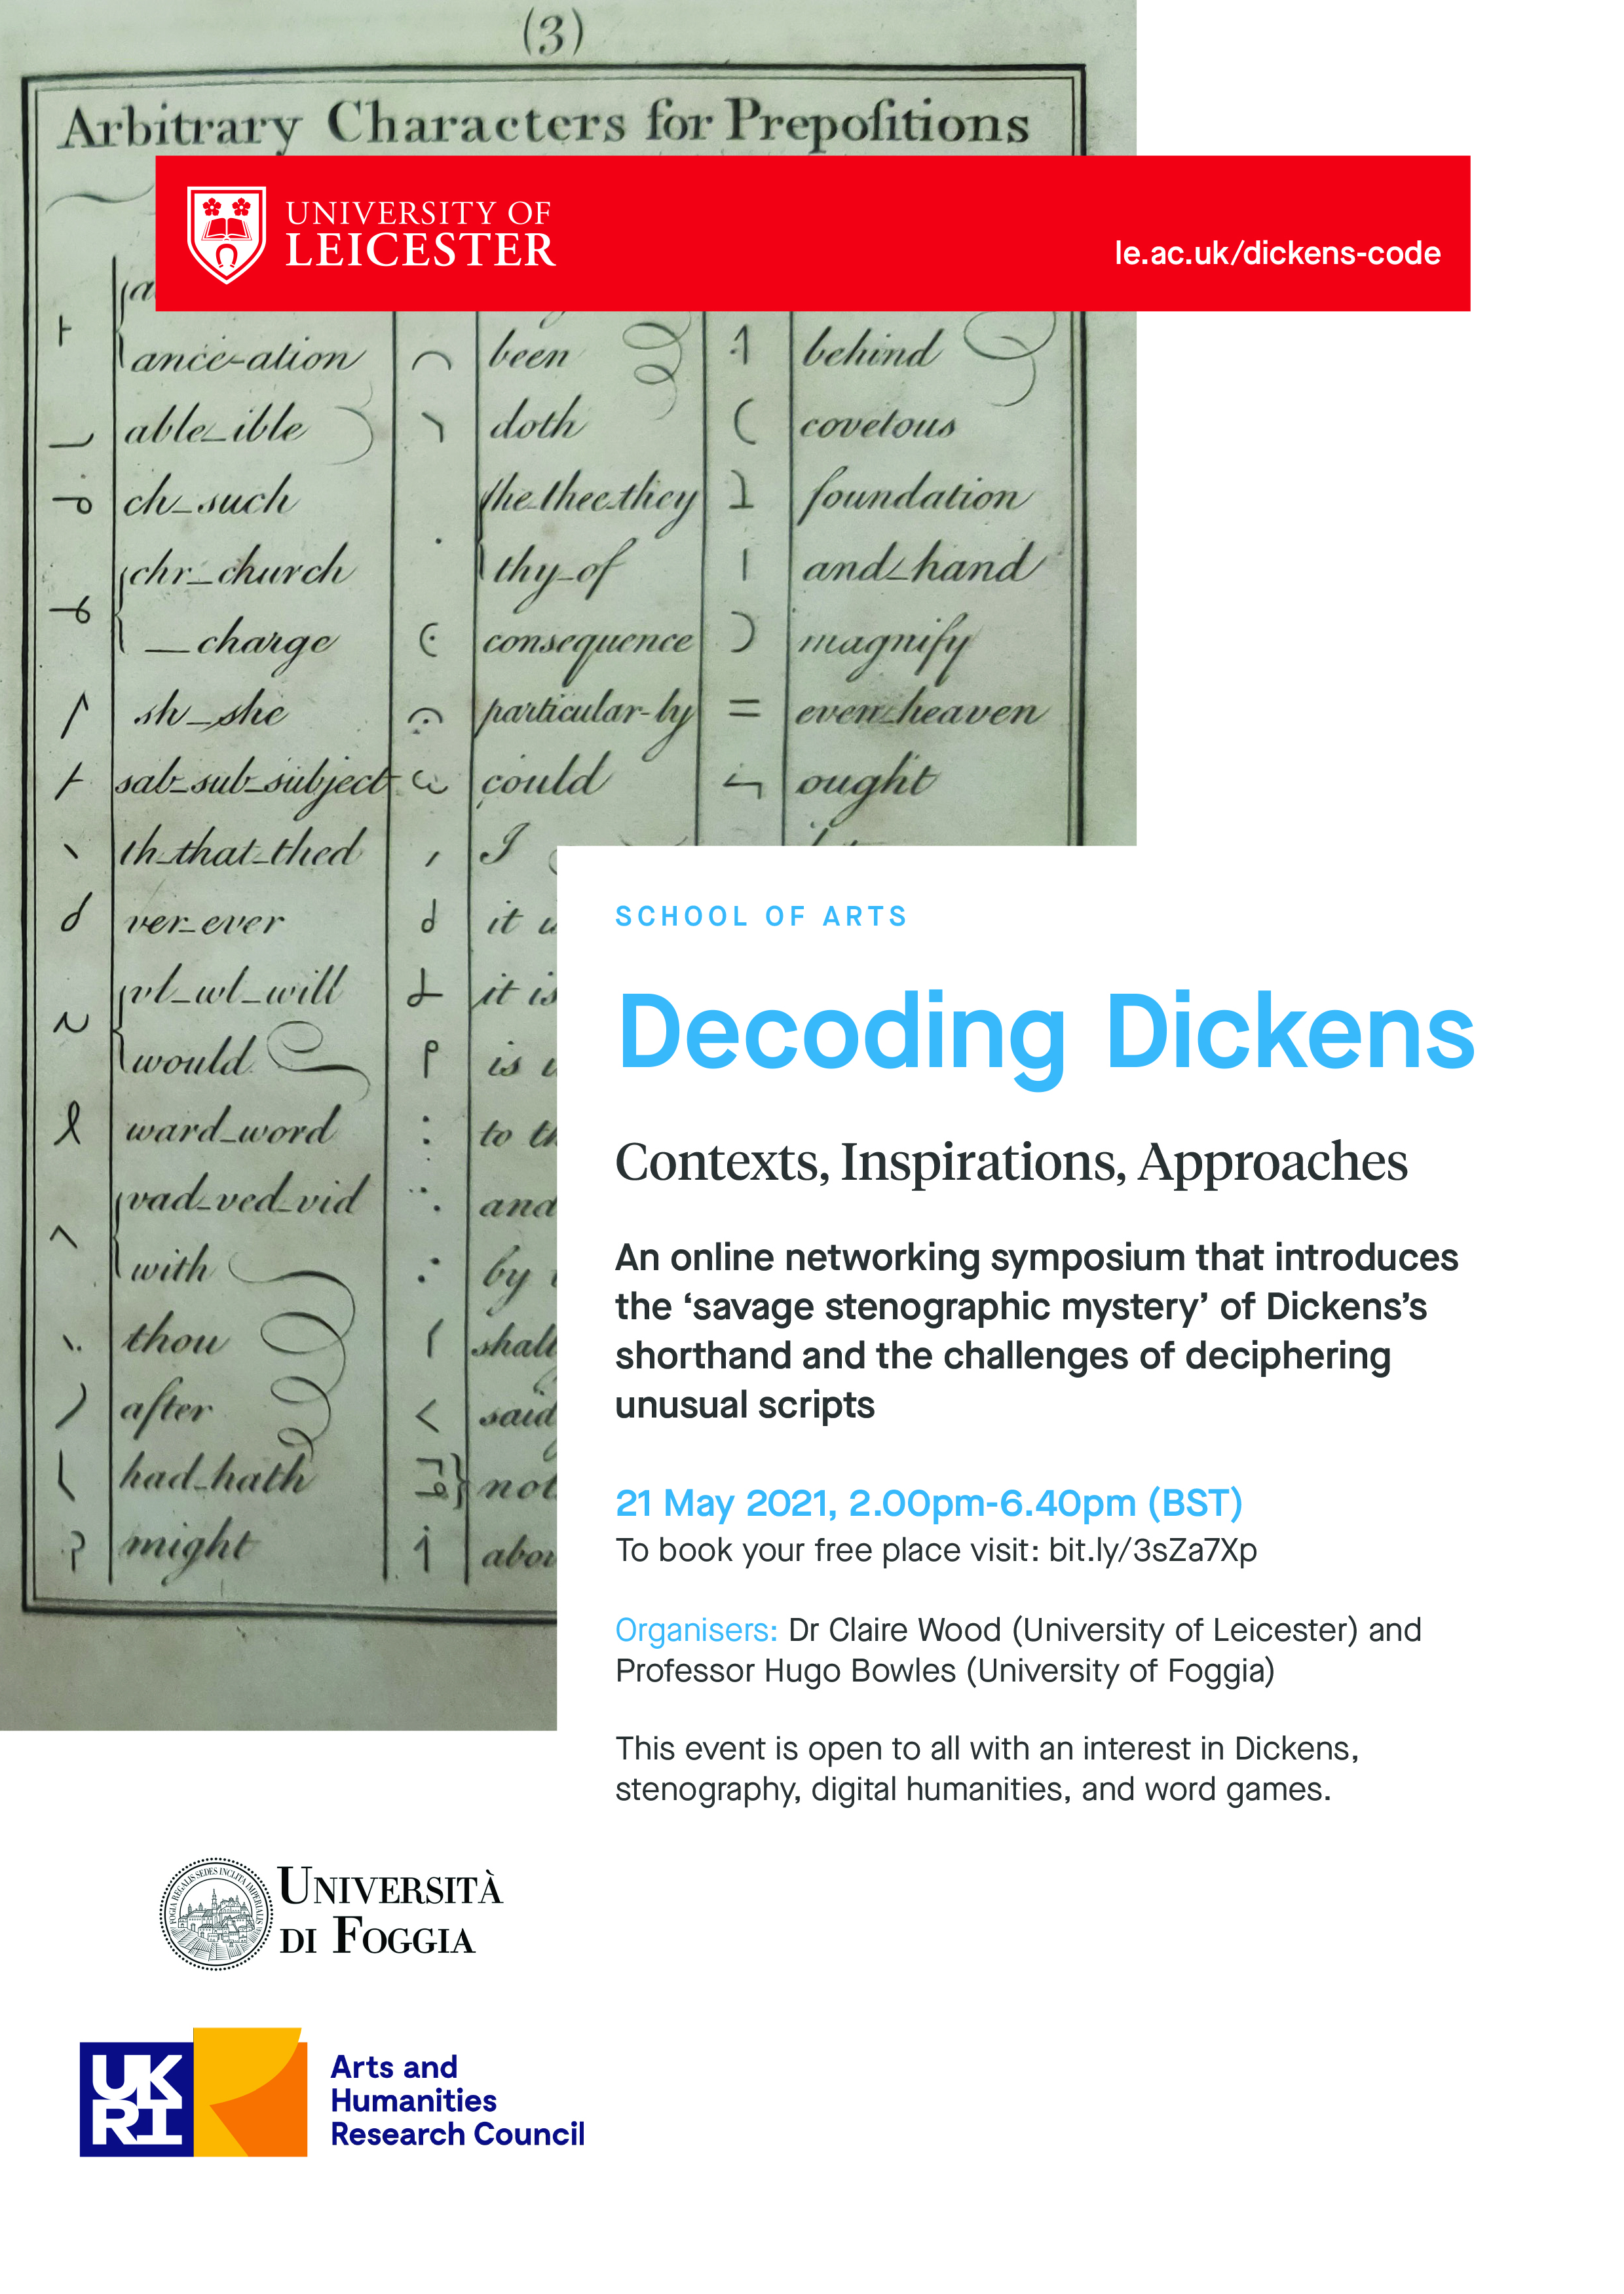 decoding-dickens-event-poster.jpg